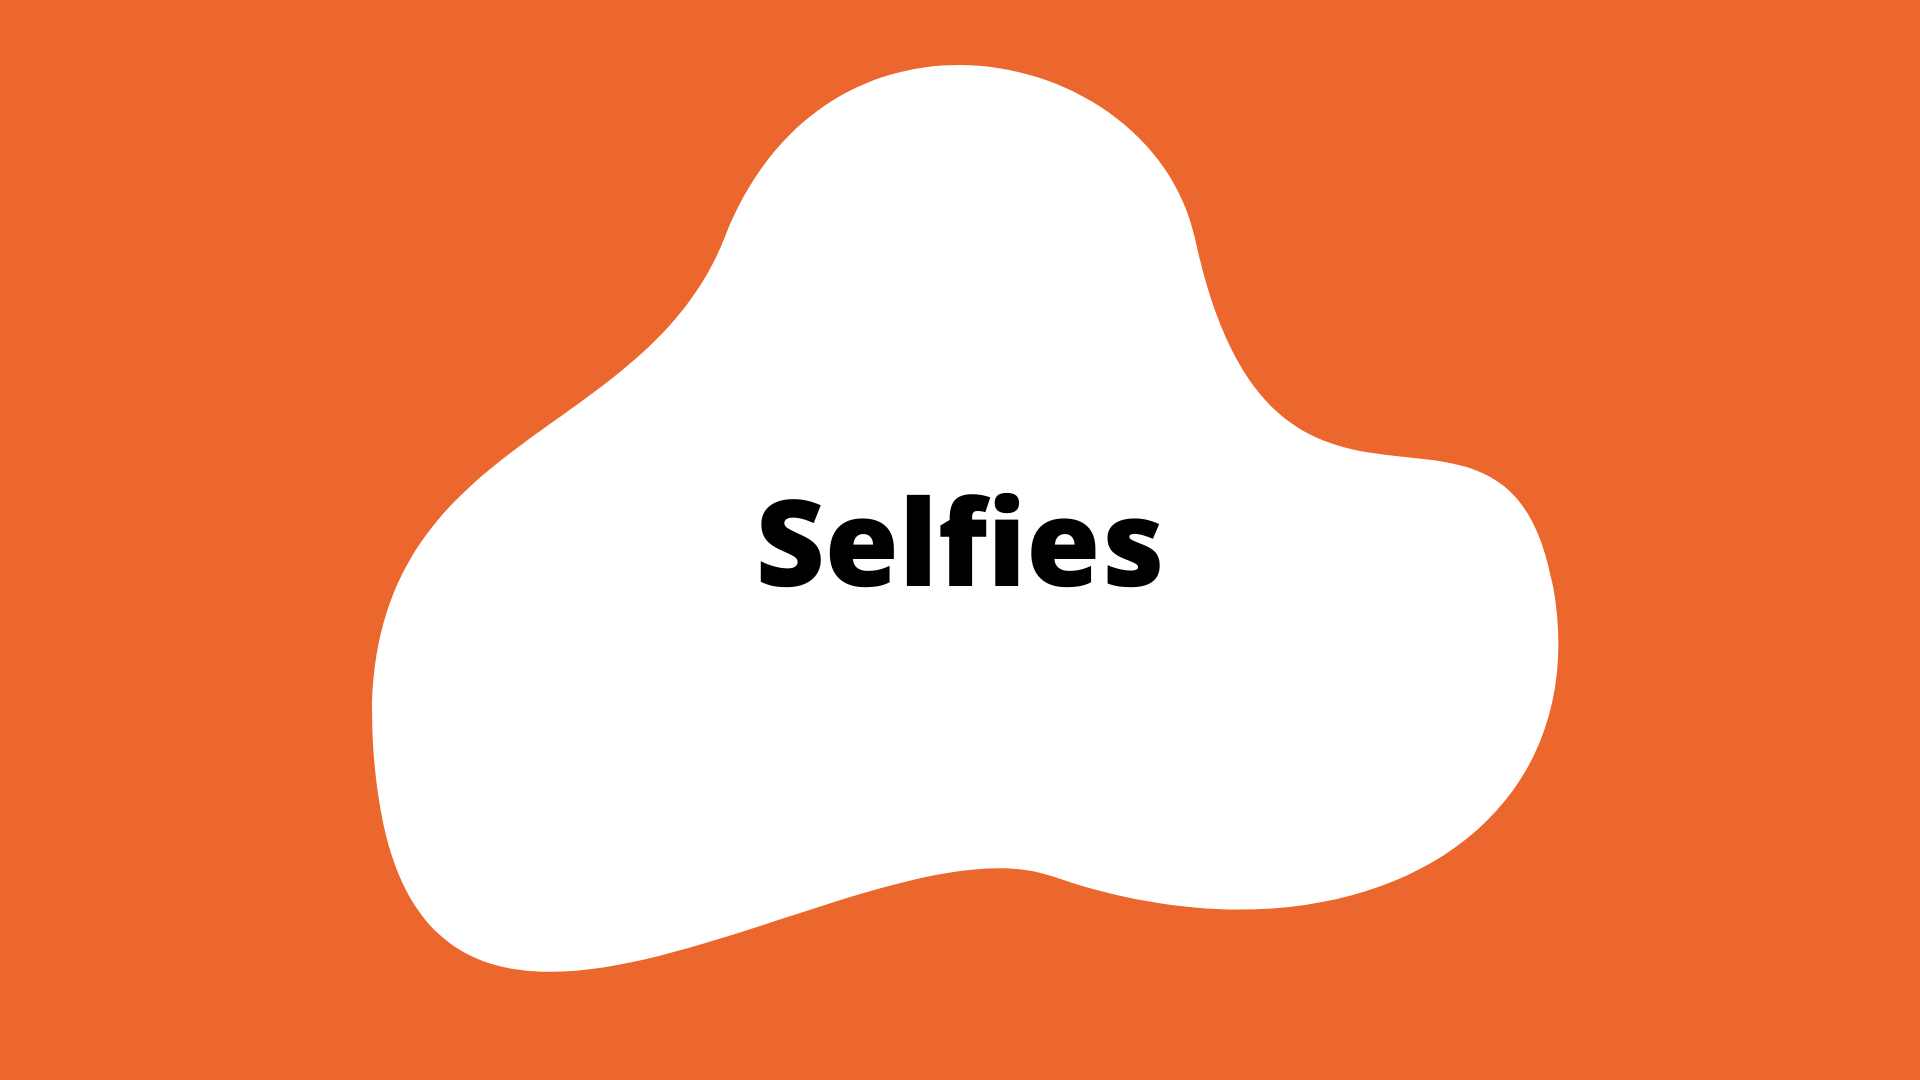 "selfies" activity button. An orange square with a white blob in the center. The title is in the blob.